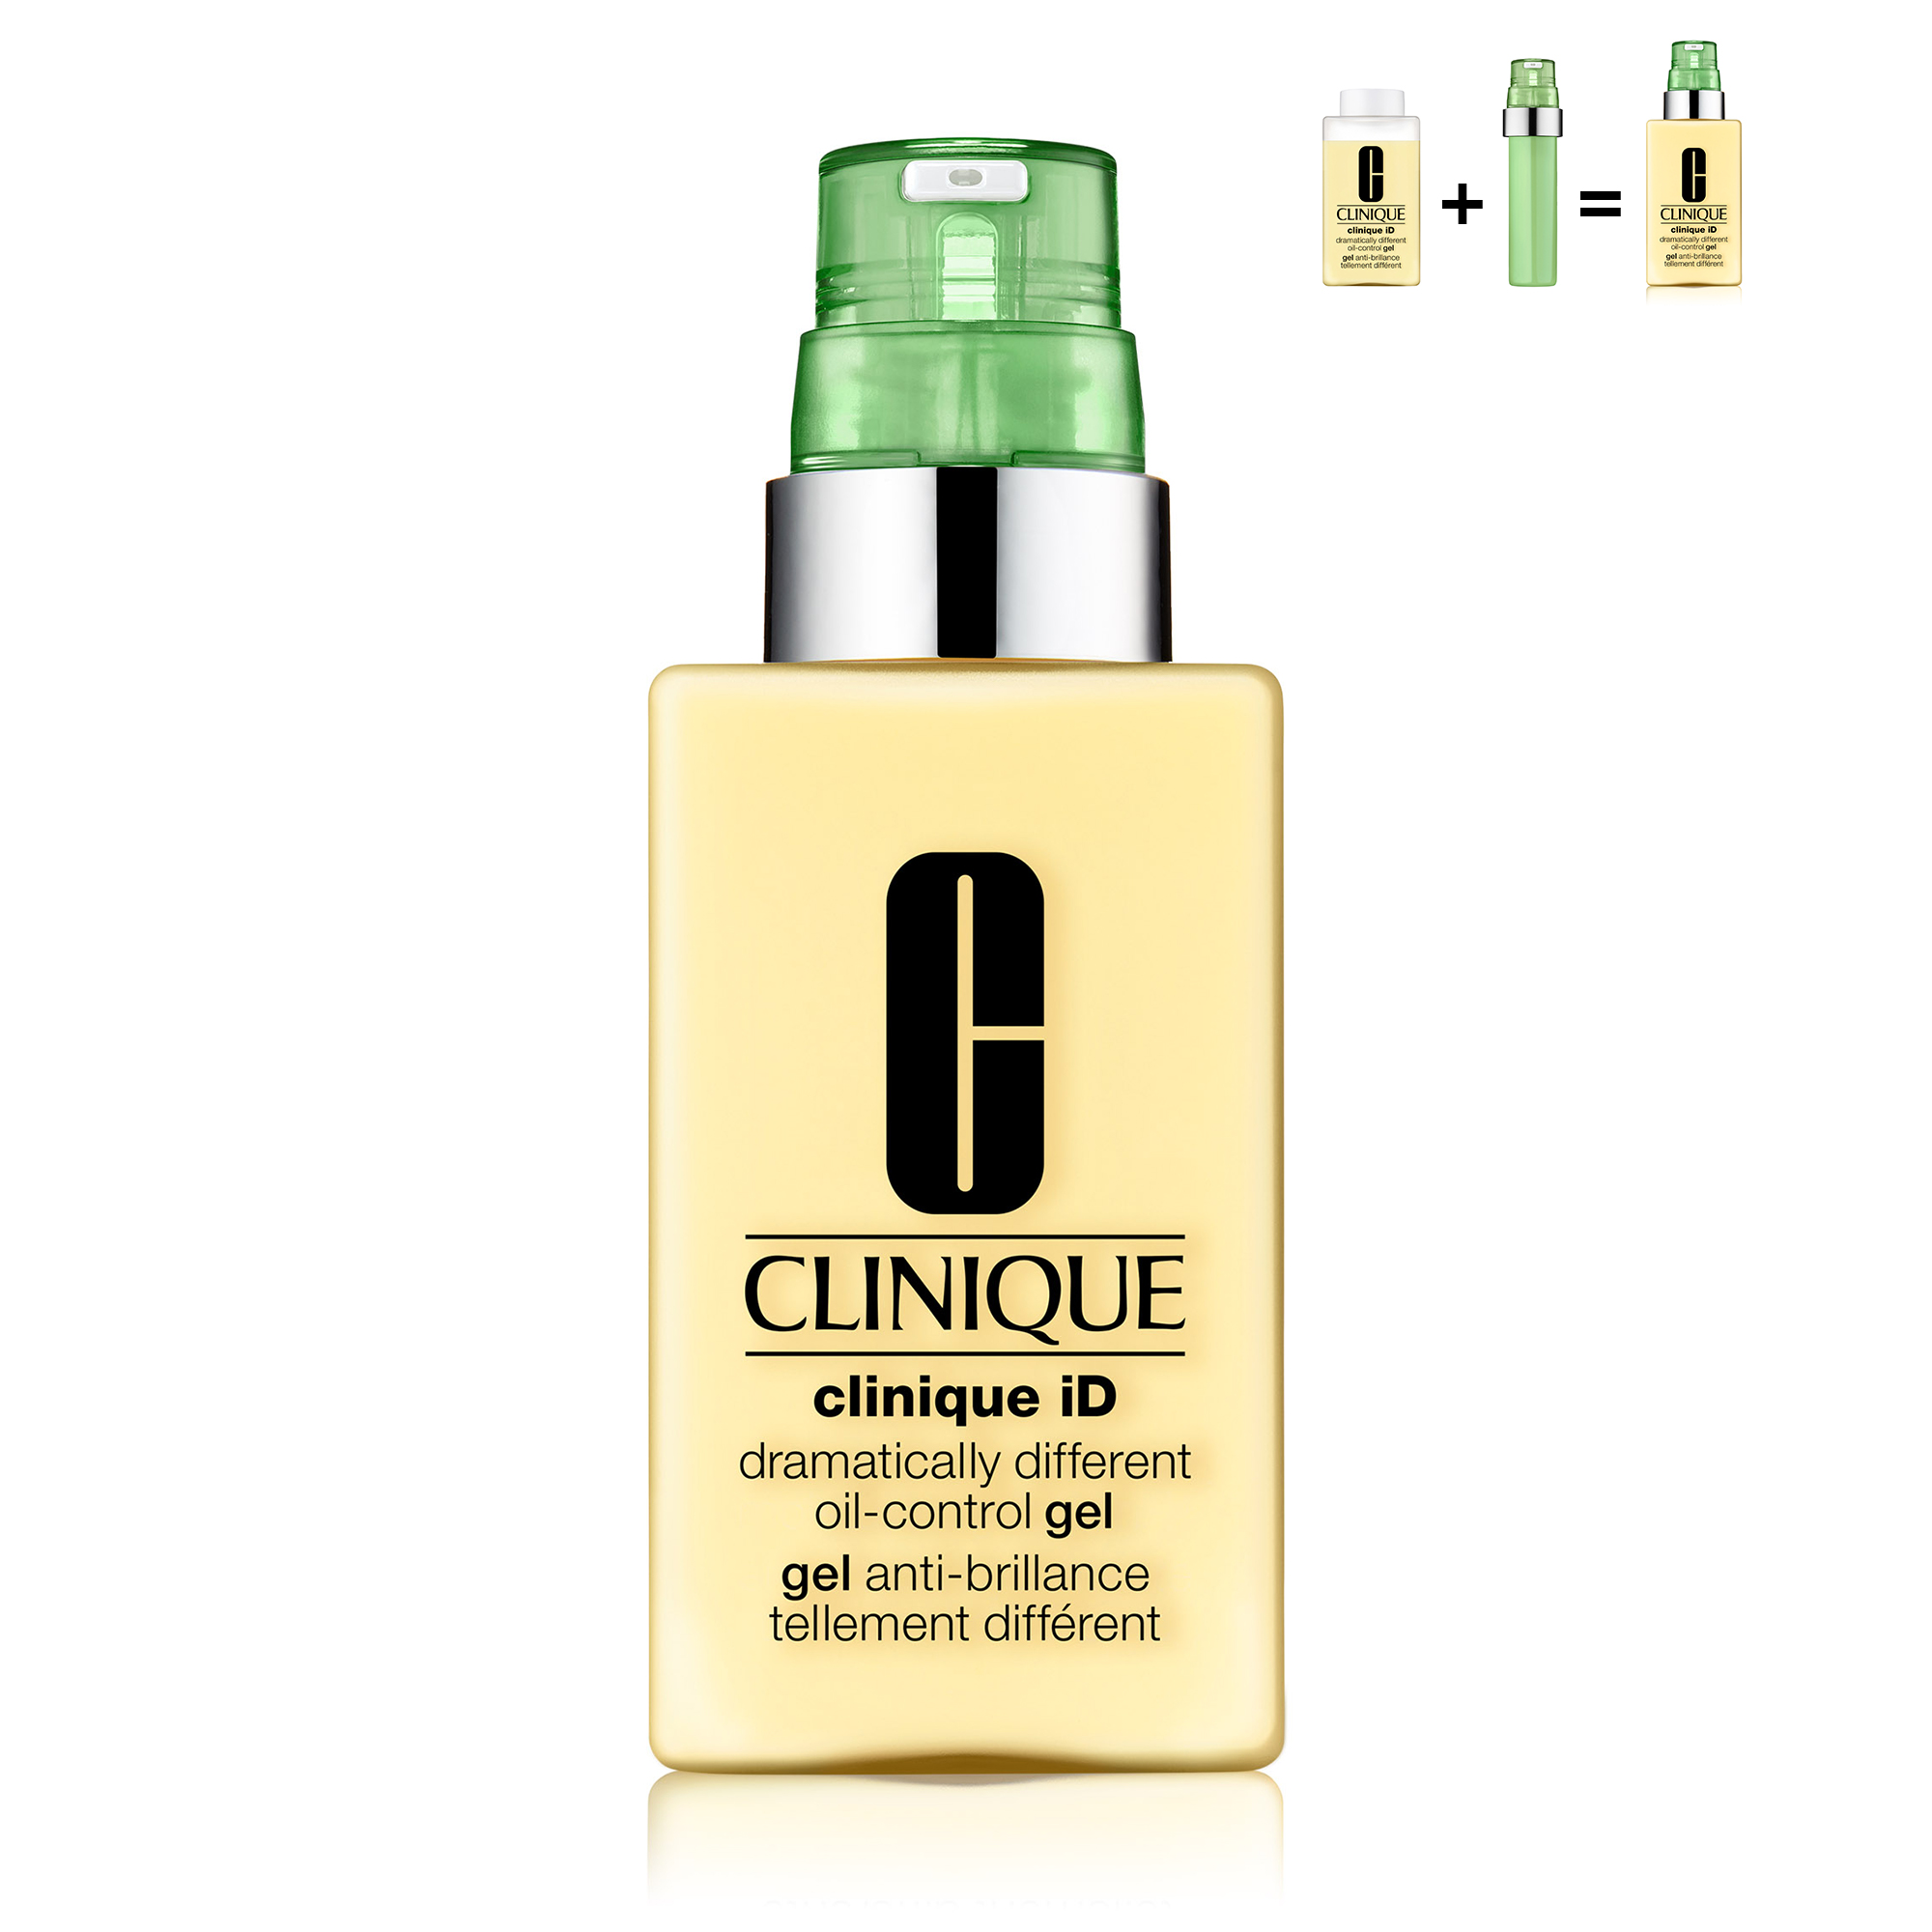 Clinique Even Better Refresh Hydrating And Repairing Makeup Sand 90 Cn 30 ml